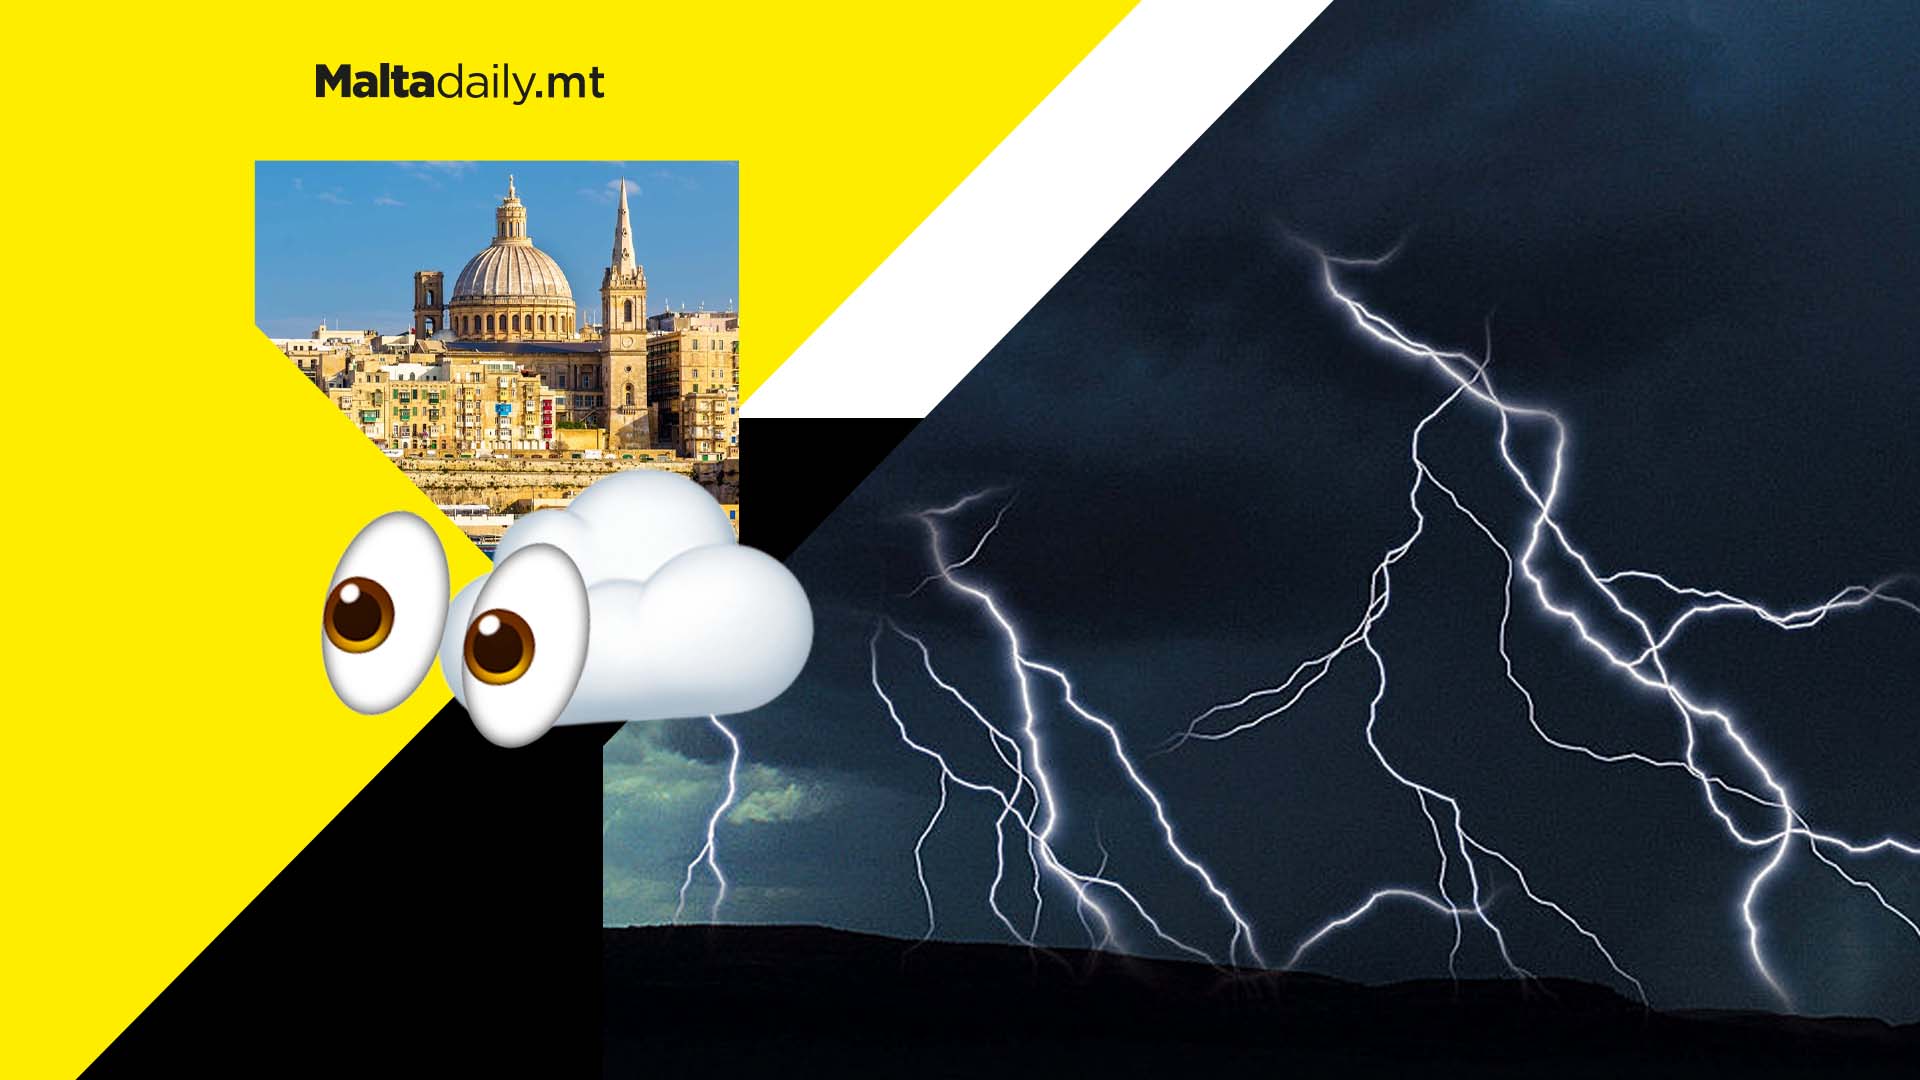 The storms are upon us: lightning and rain expected later this month